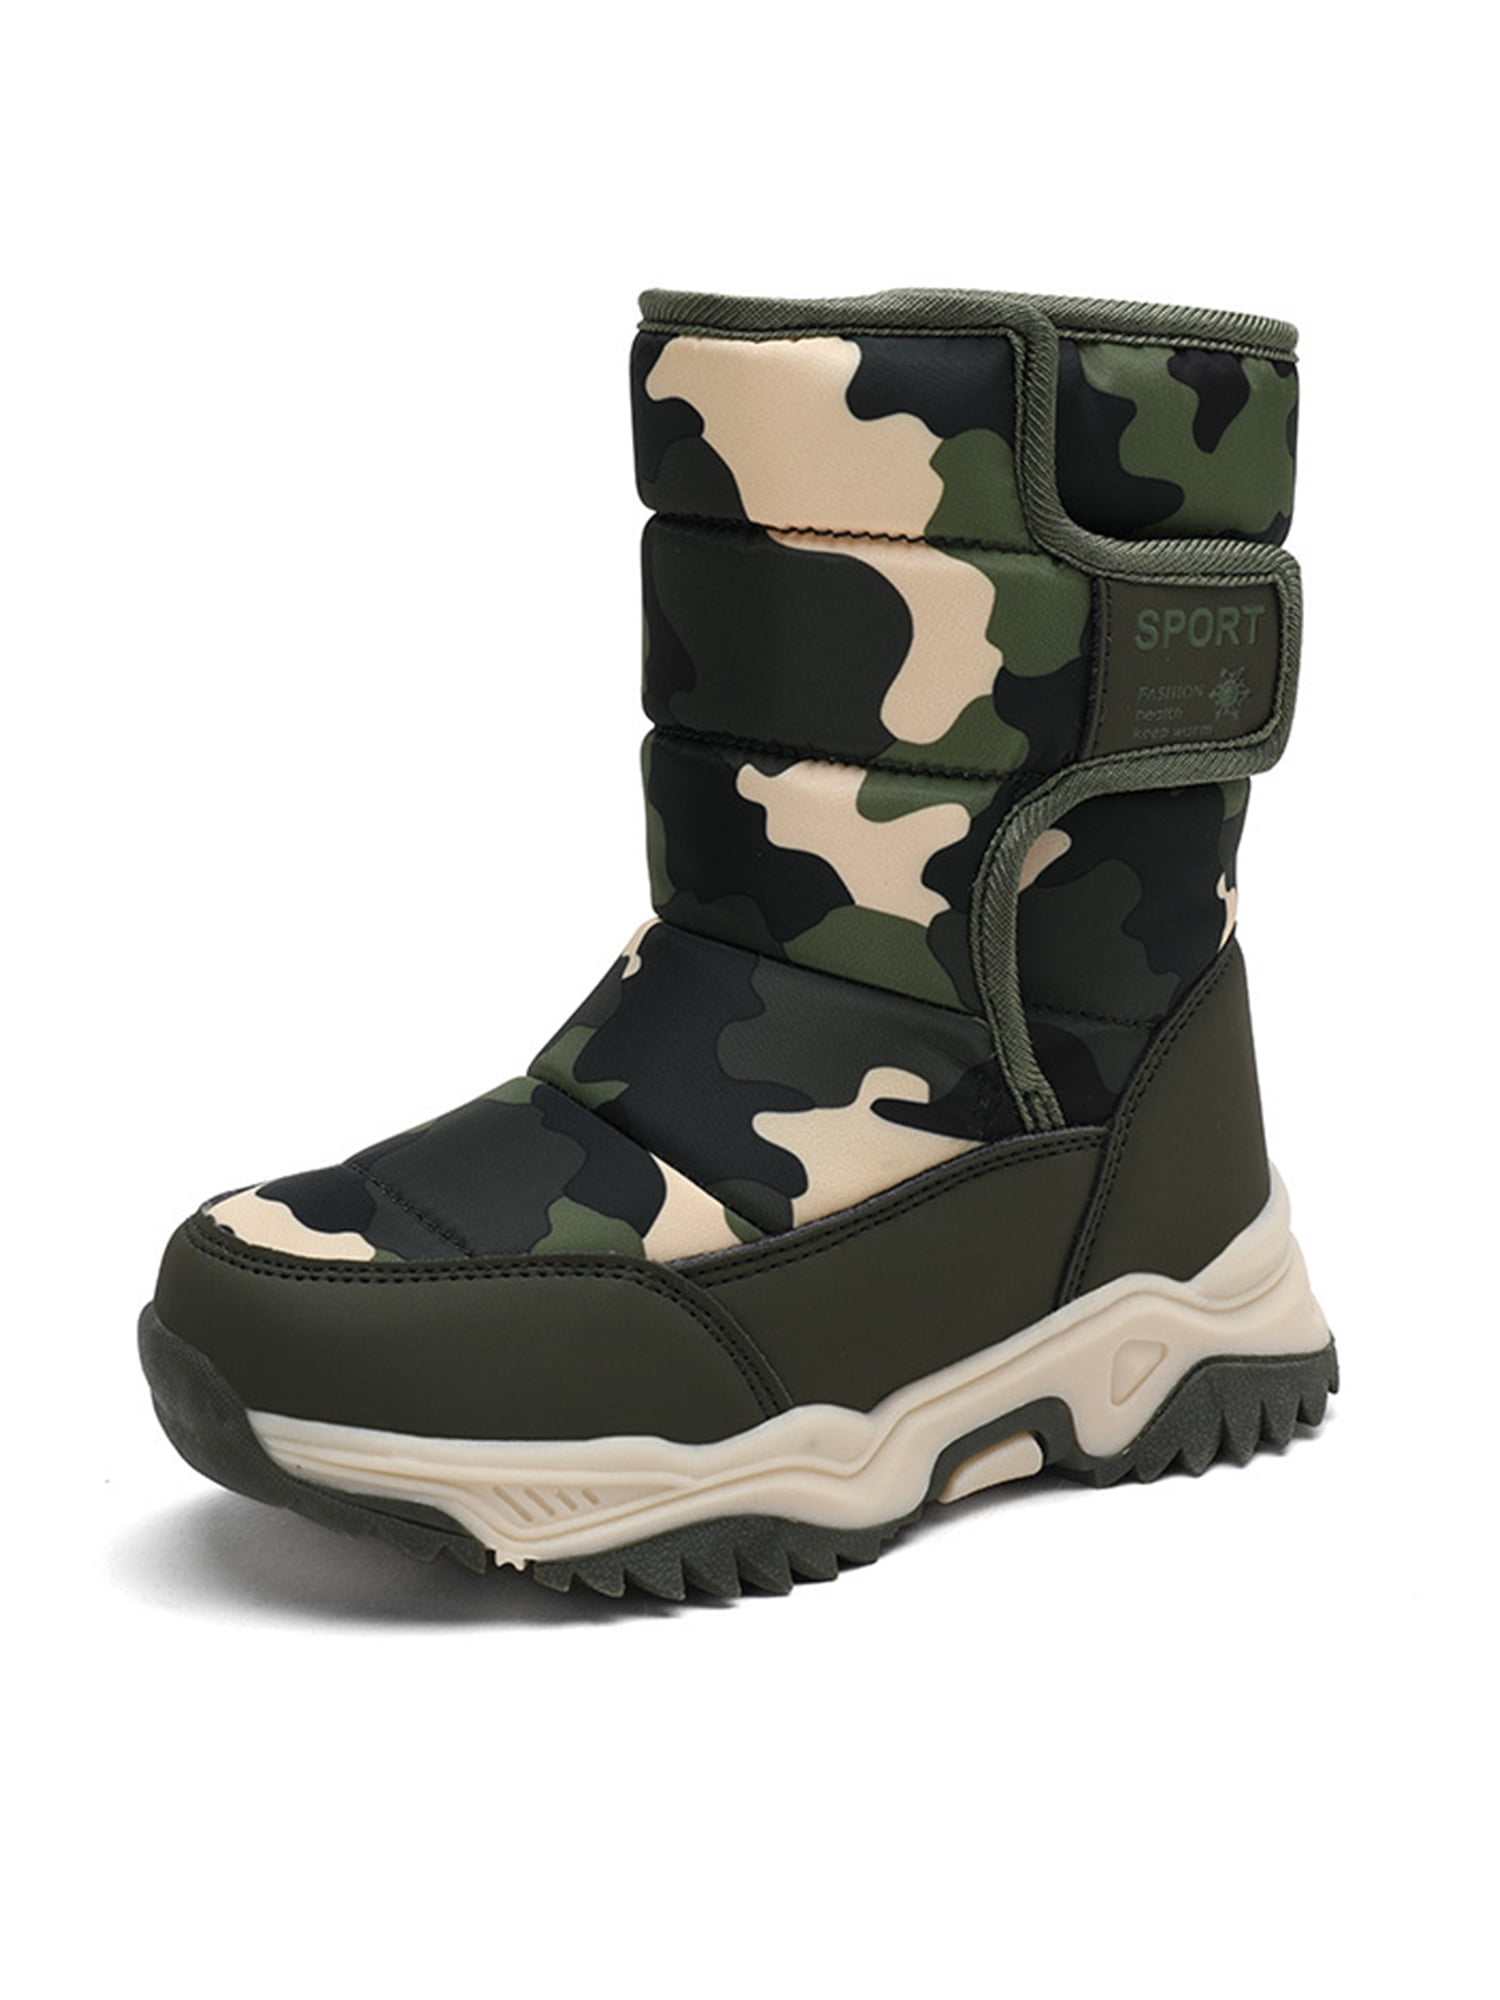 Kids Boys Girls Fur Lined Army Snow Boots Winter Shoes Warm Infant New Shoes 